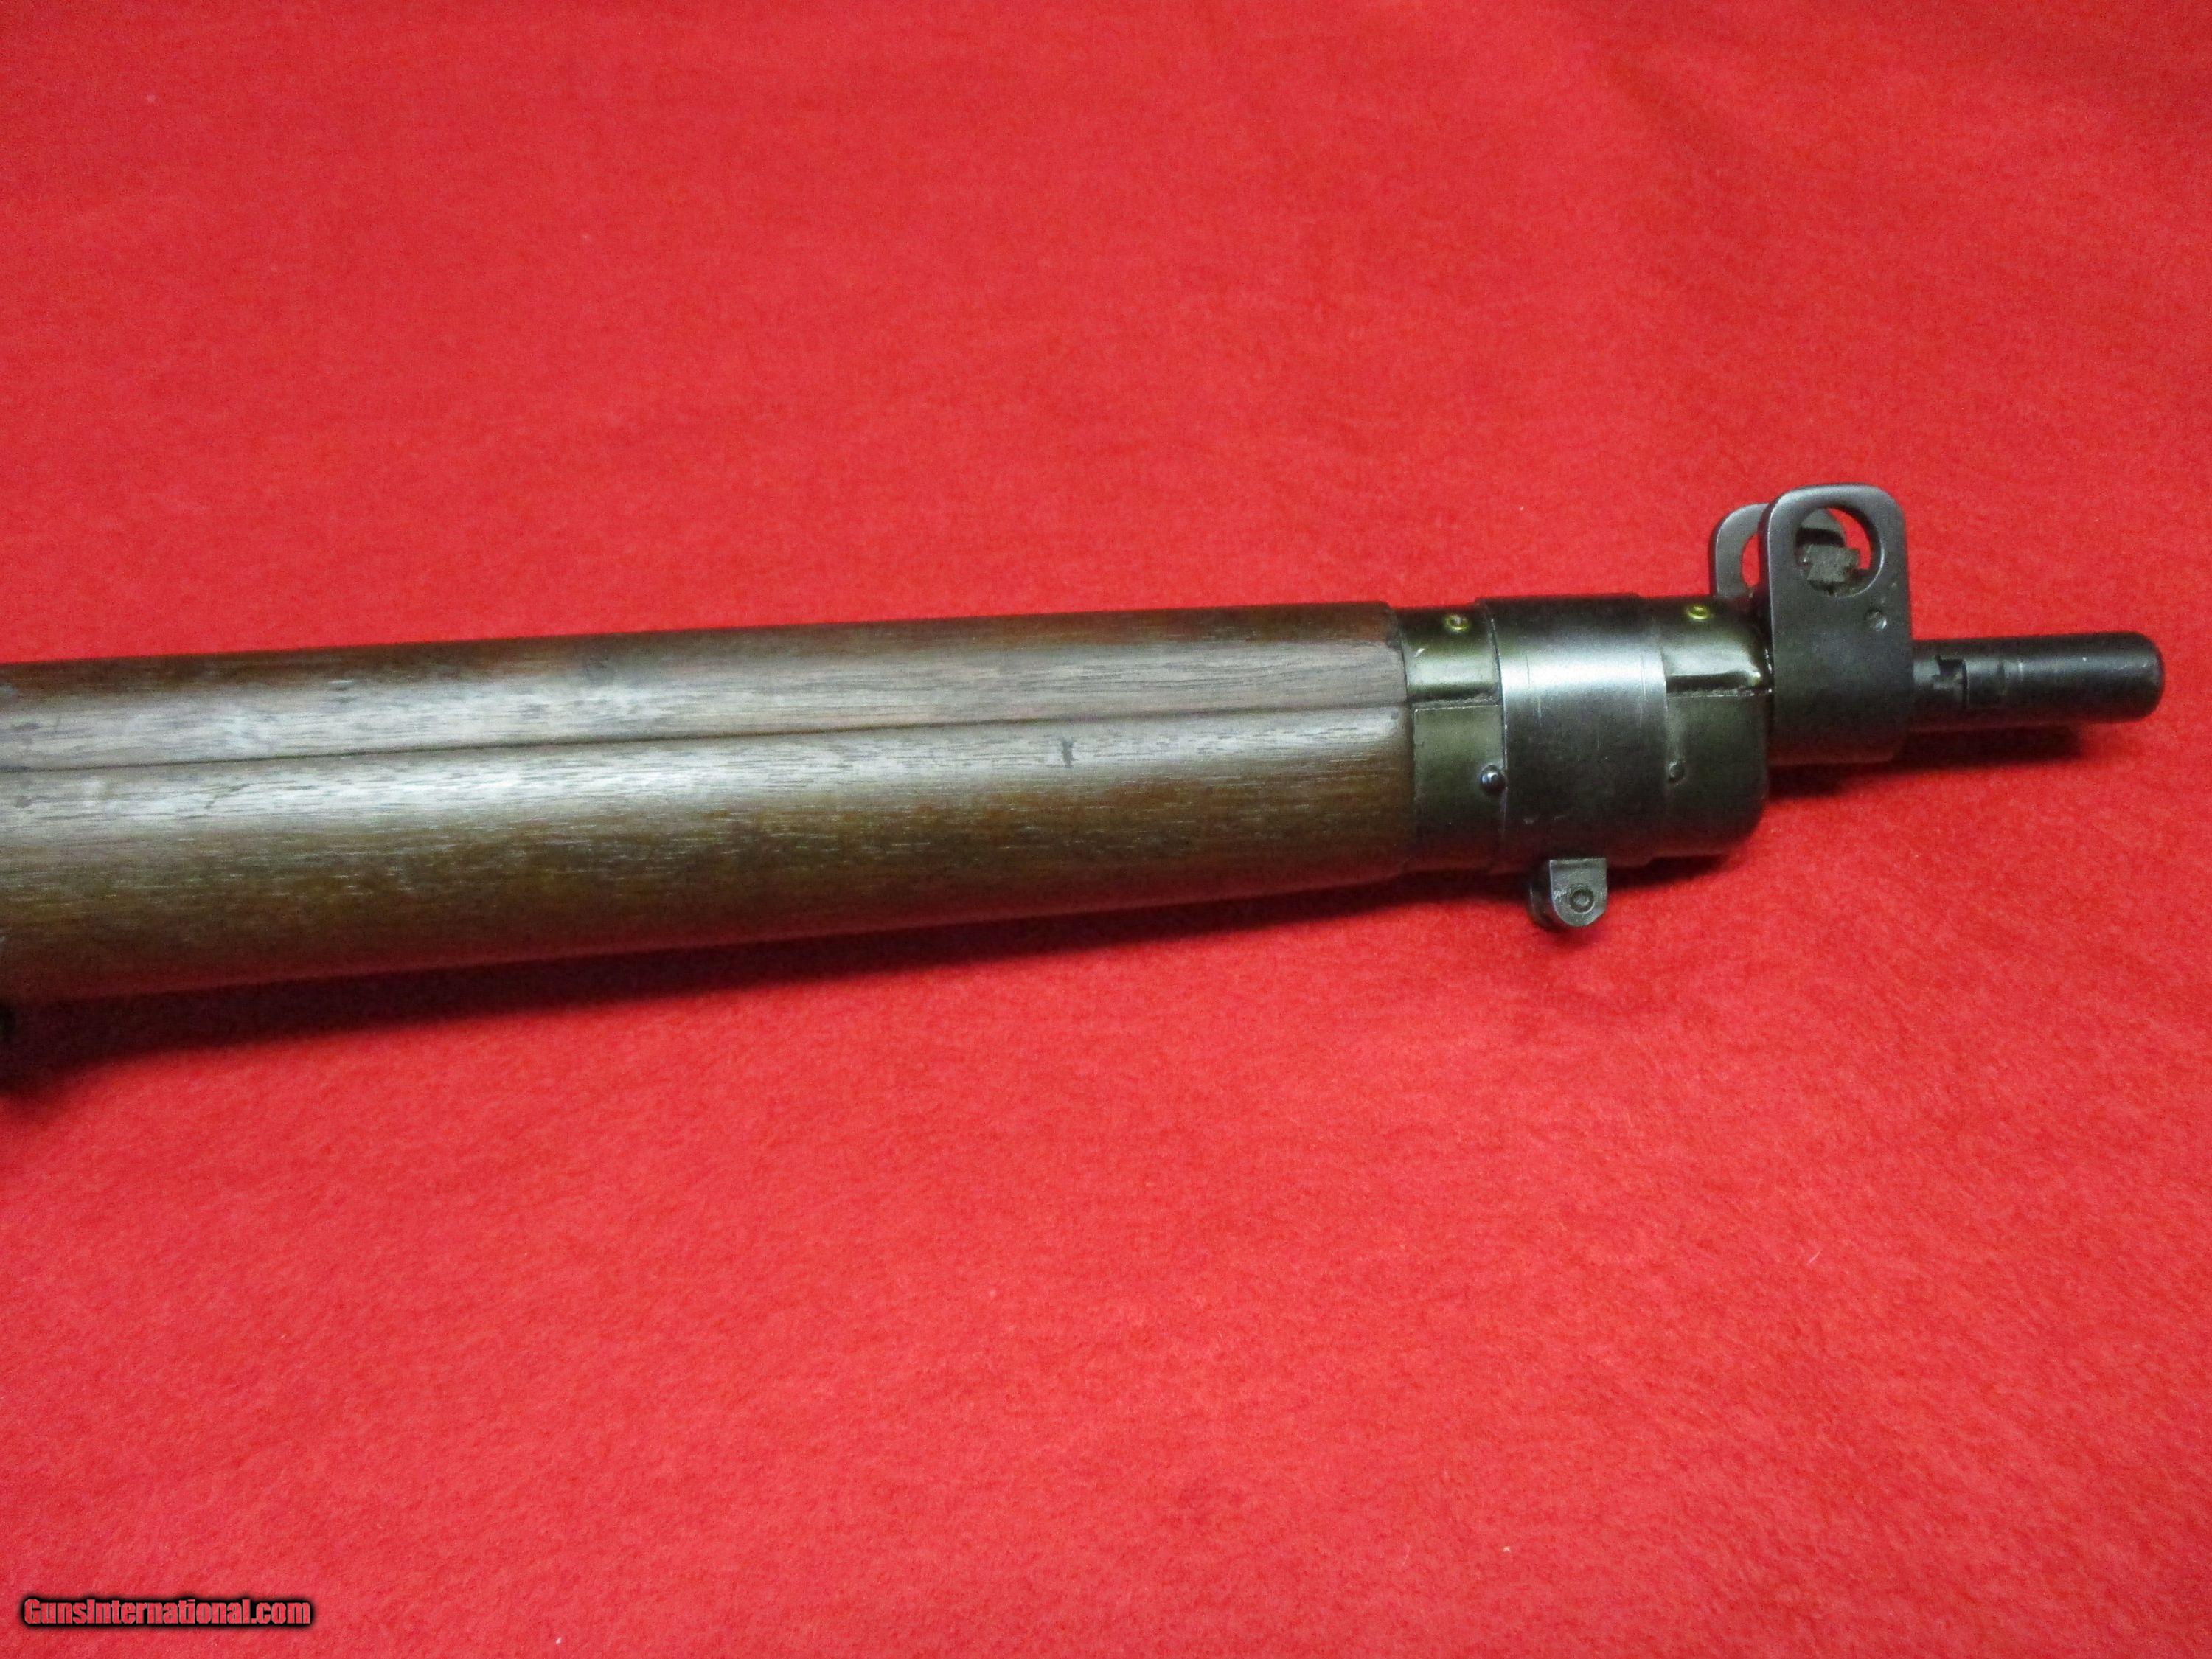 ENFIELD NO. 4 Mk 1* SMLE LONG BRANC for sale at :  995488914